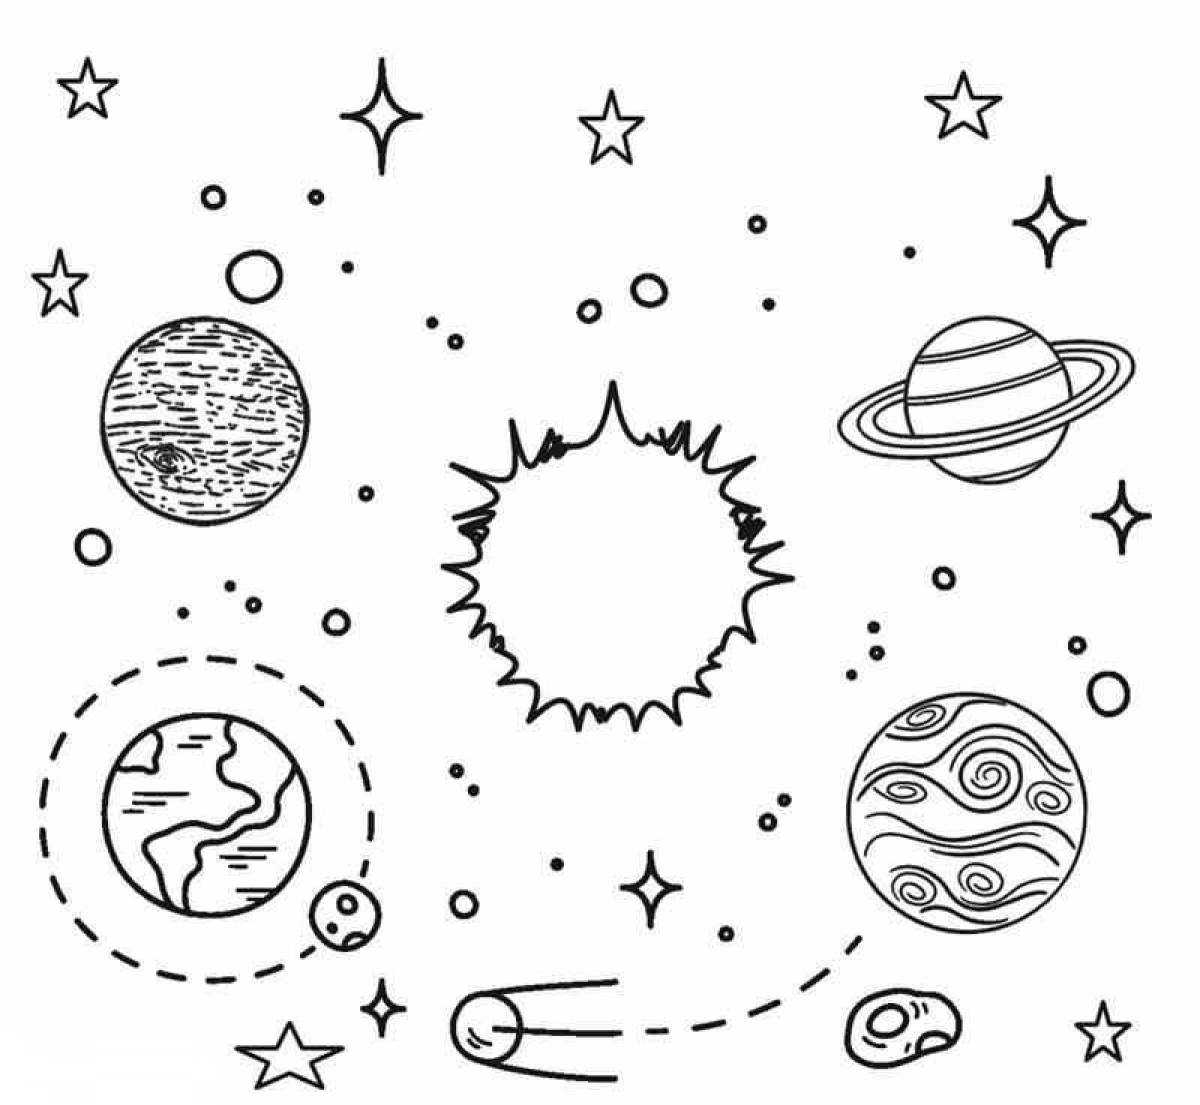 Majestic universe coloring page